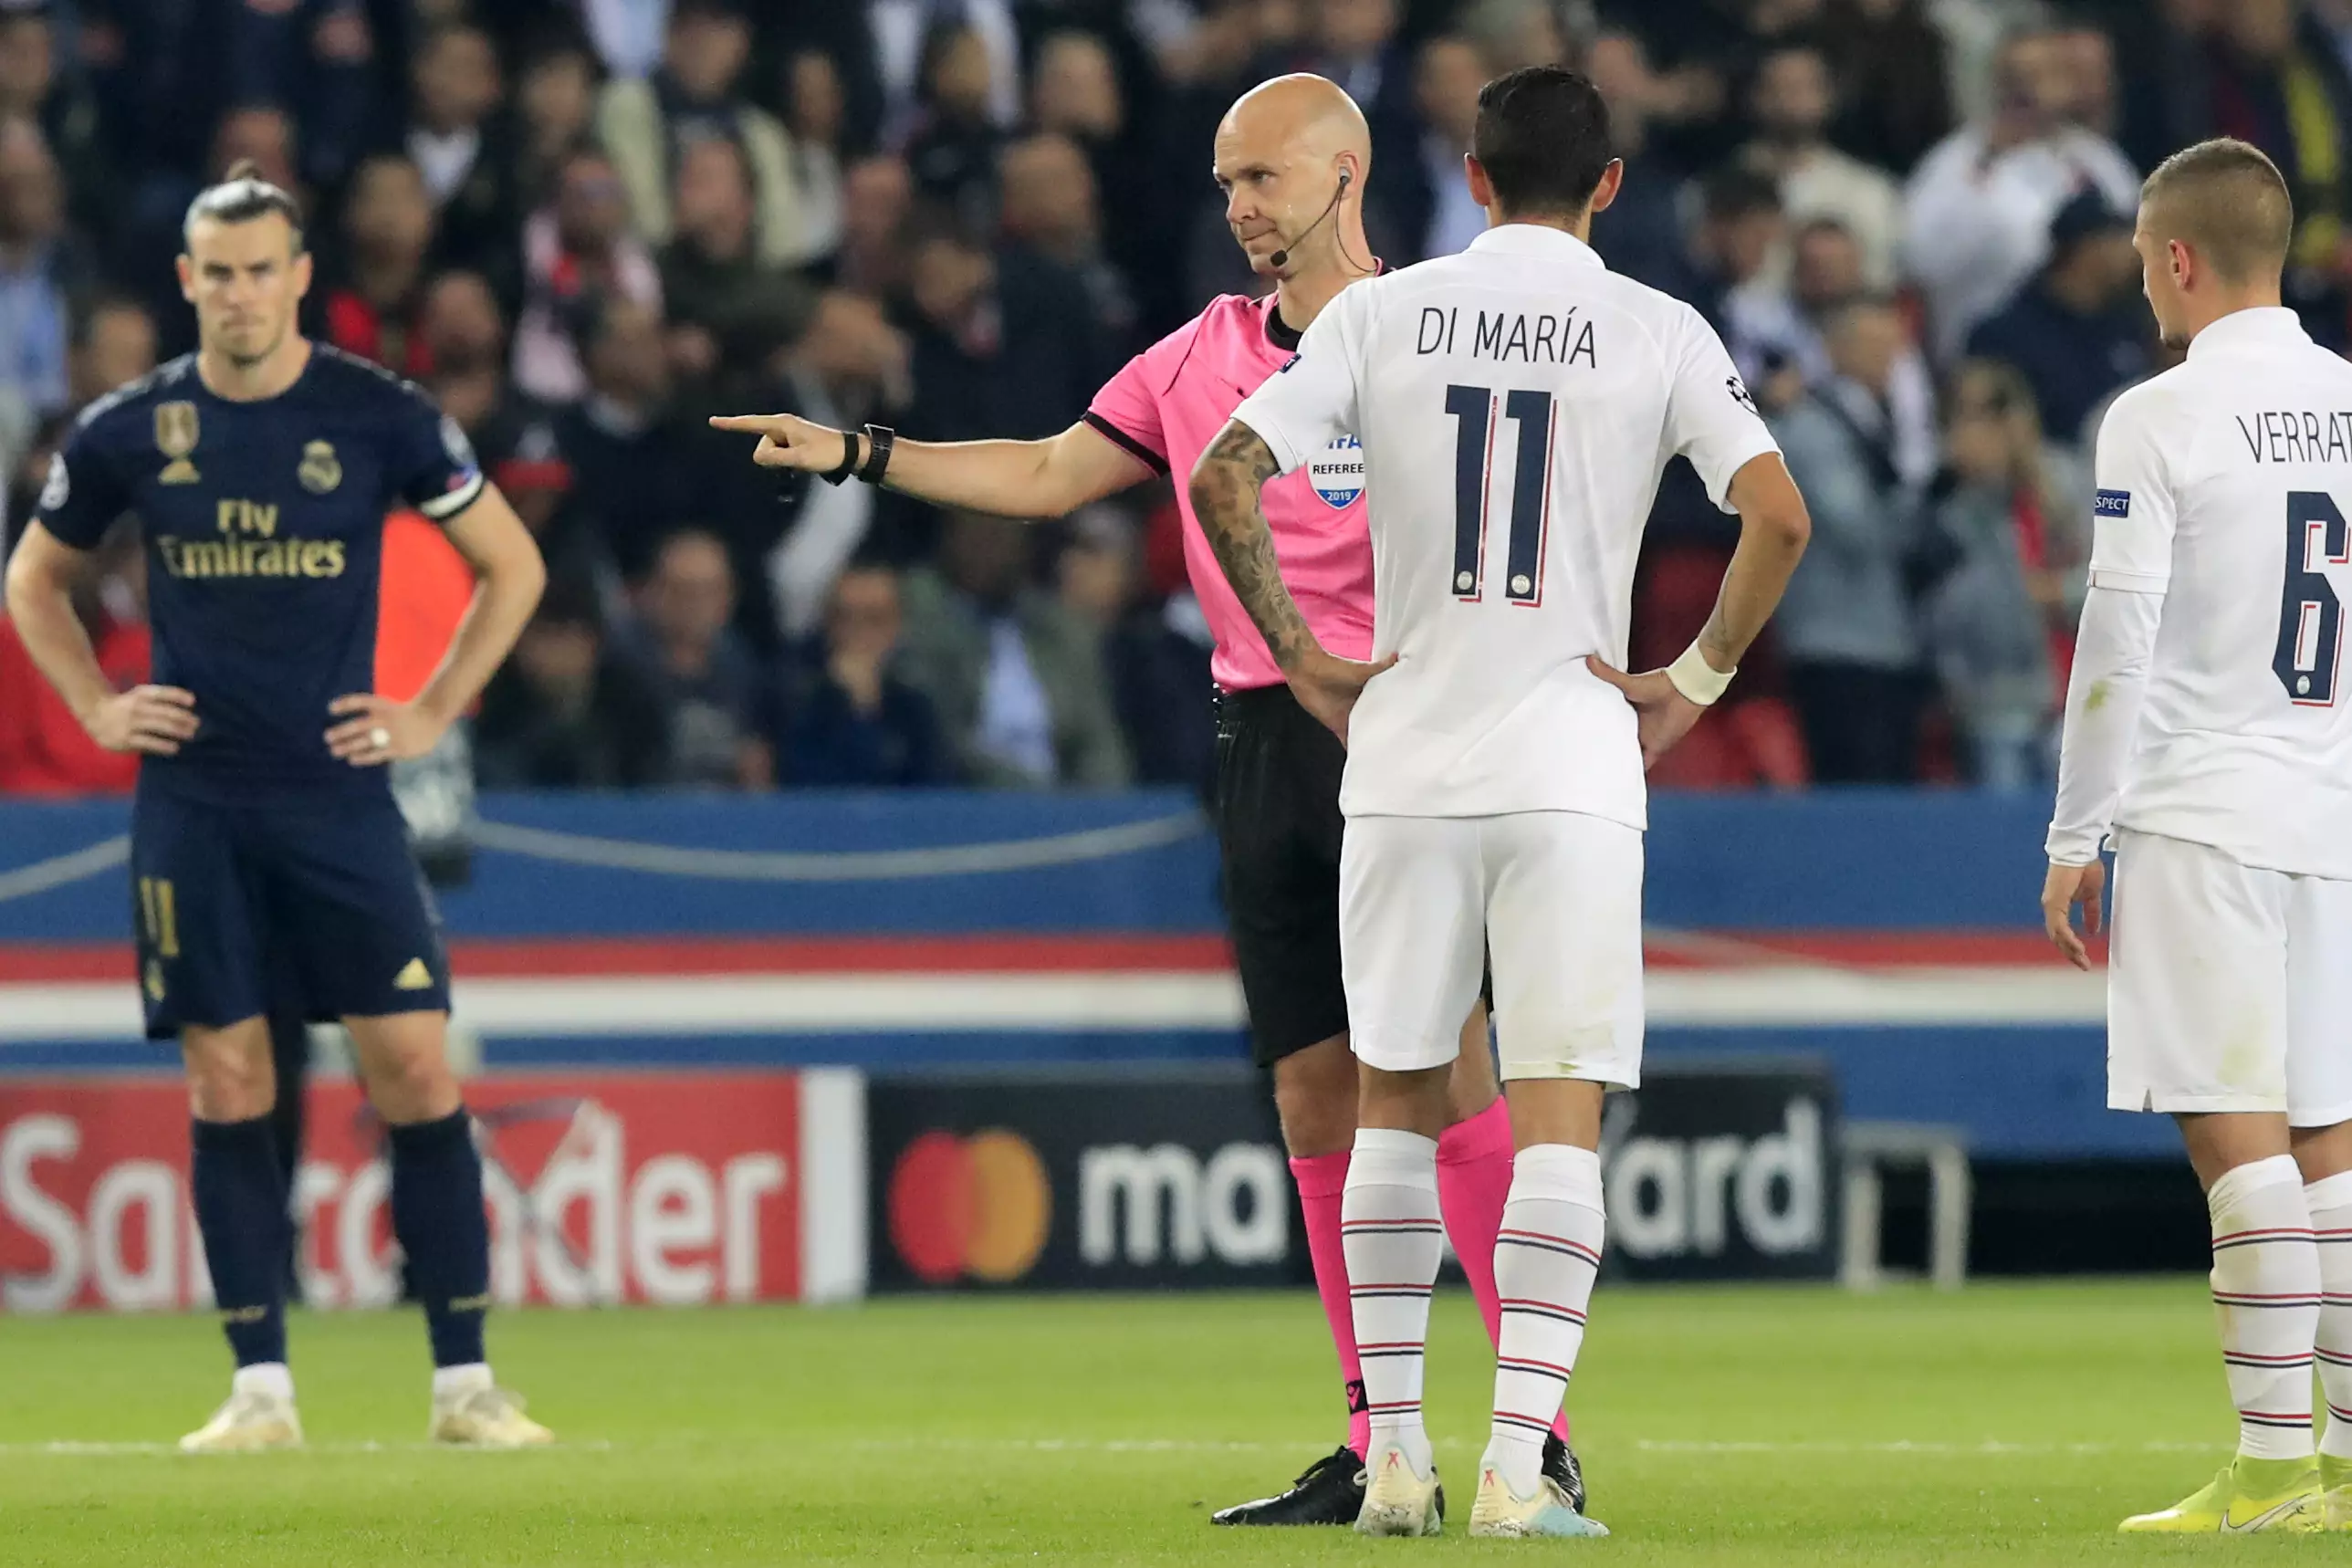 Referee Anthony Taylor disallowed the goal after looking at the VAR screen